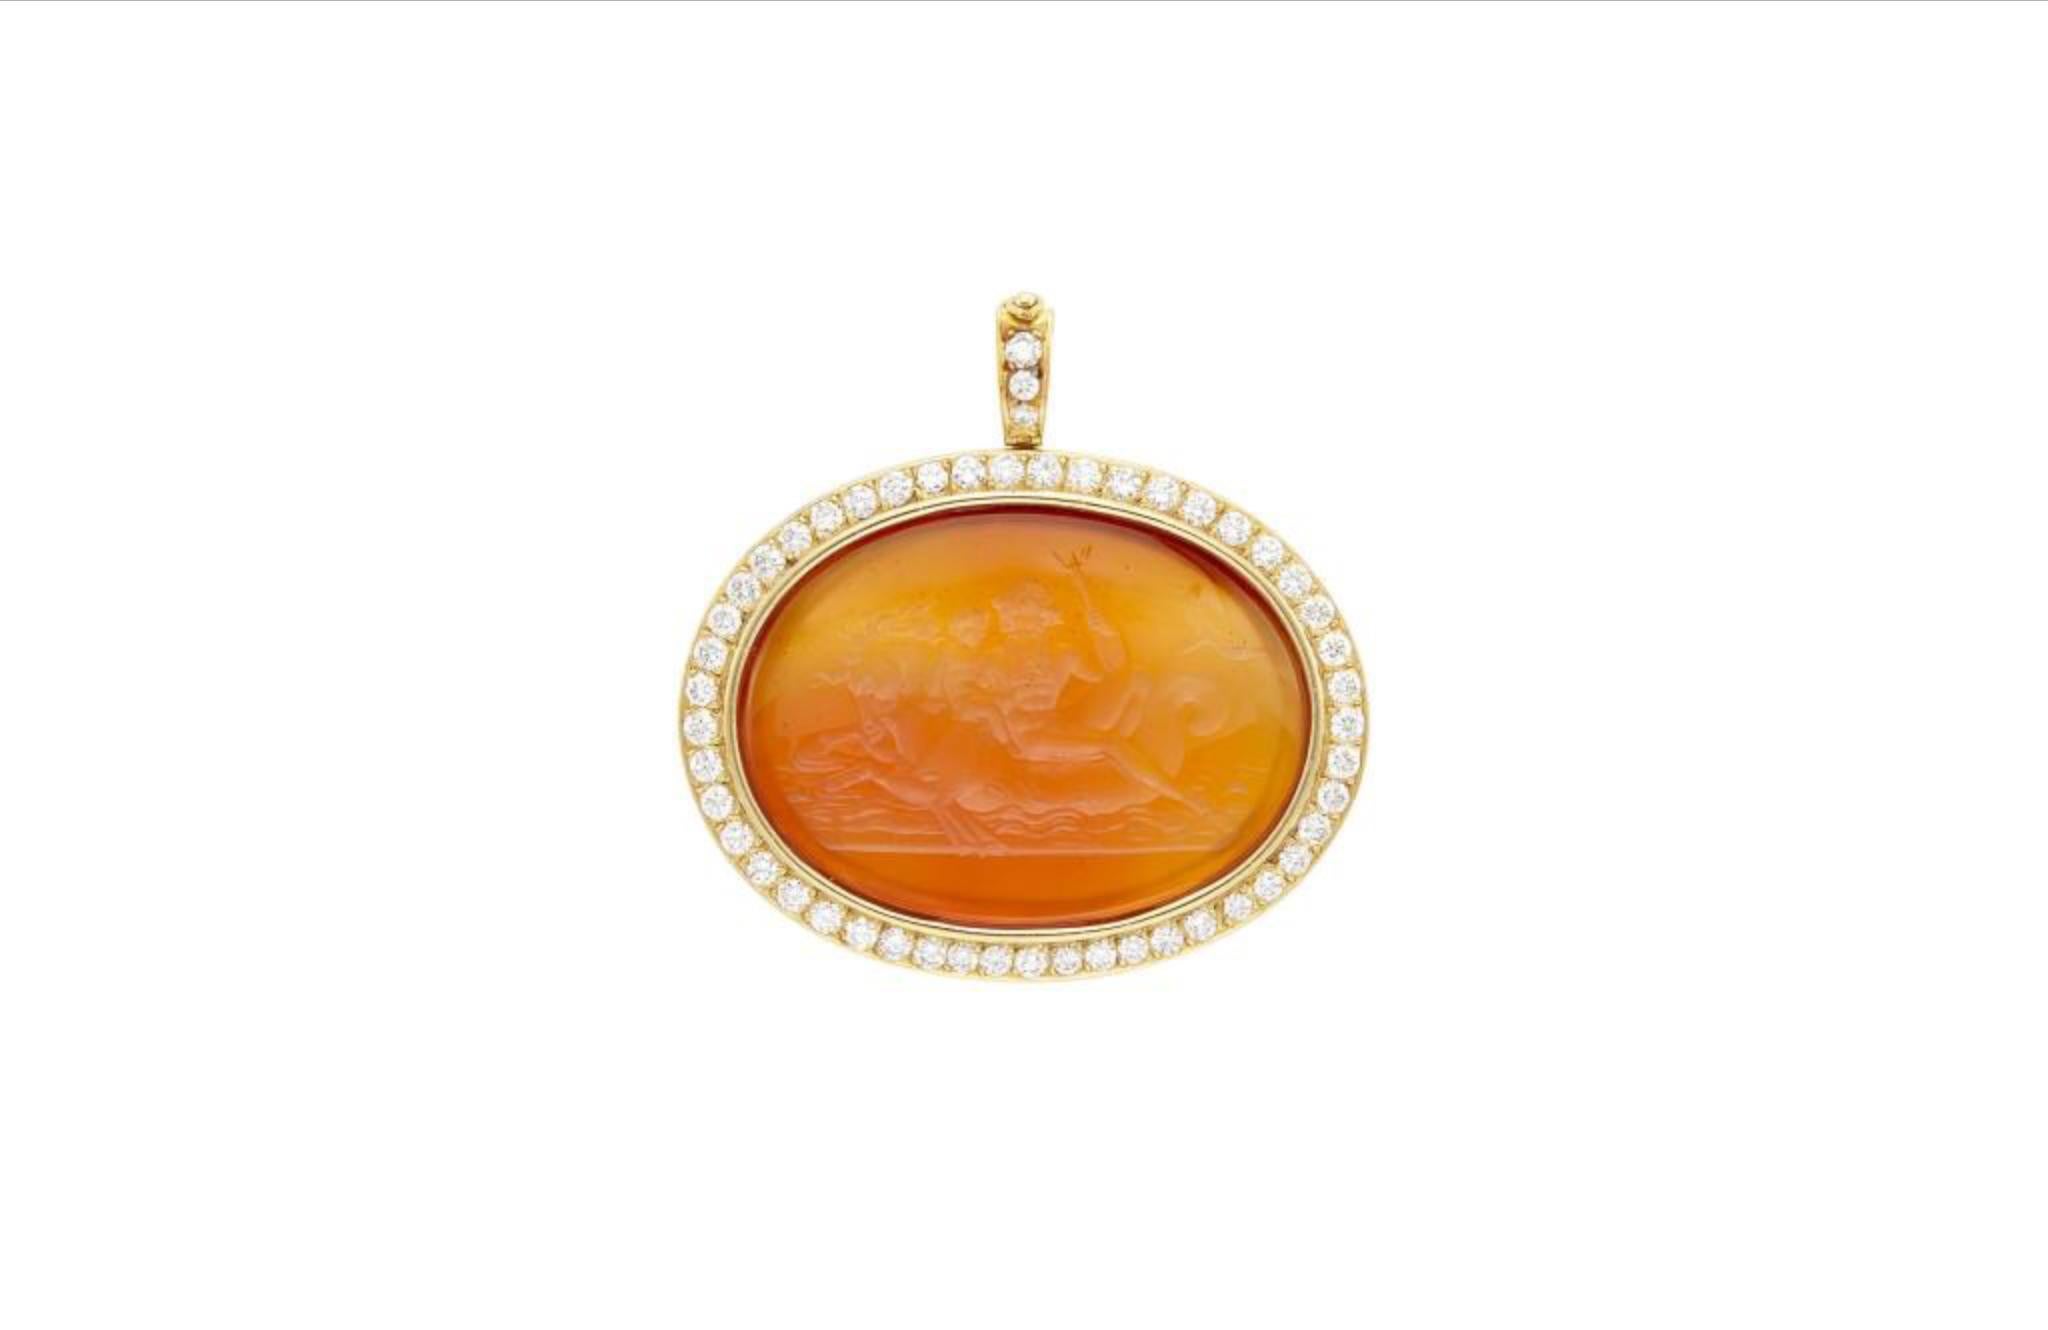 Intaglio pendant-brooch in 18kt yellow gold with one oval carved carnelian (app. 30.0 x 40.0 mm) and 51 round diamonds (app. 2.15 cts., app. 12.5 dwts. gross.)